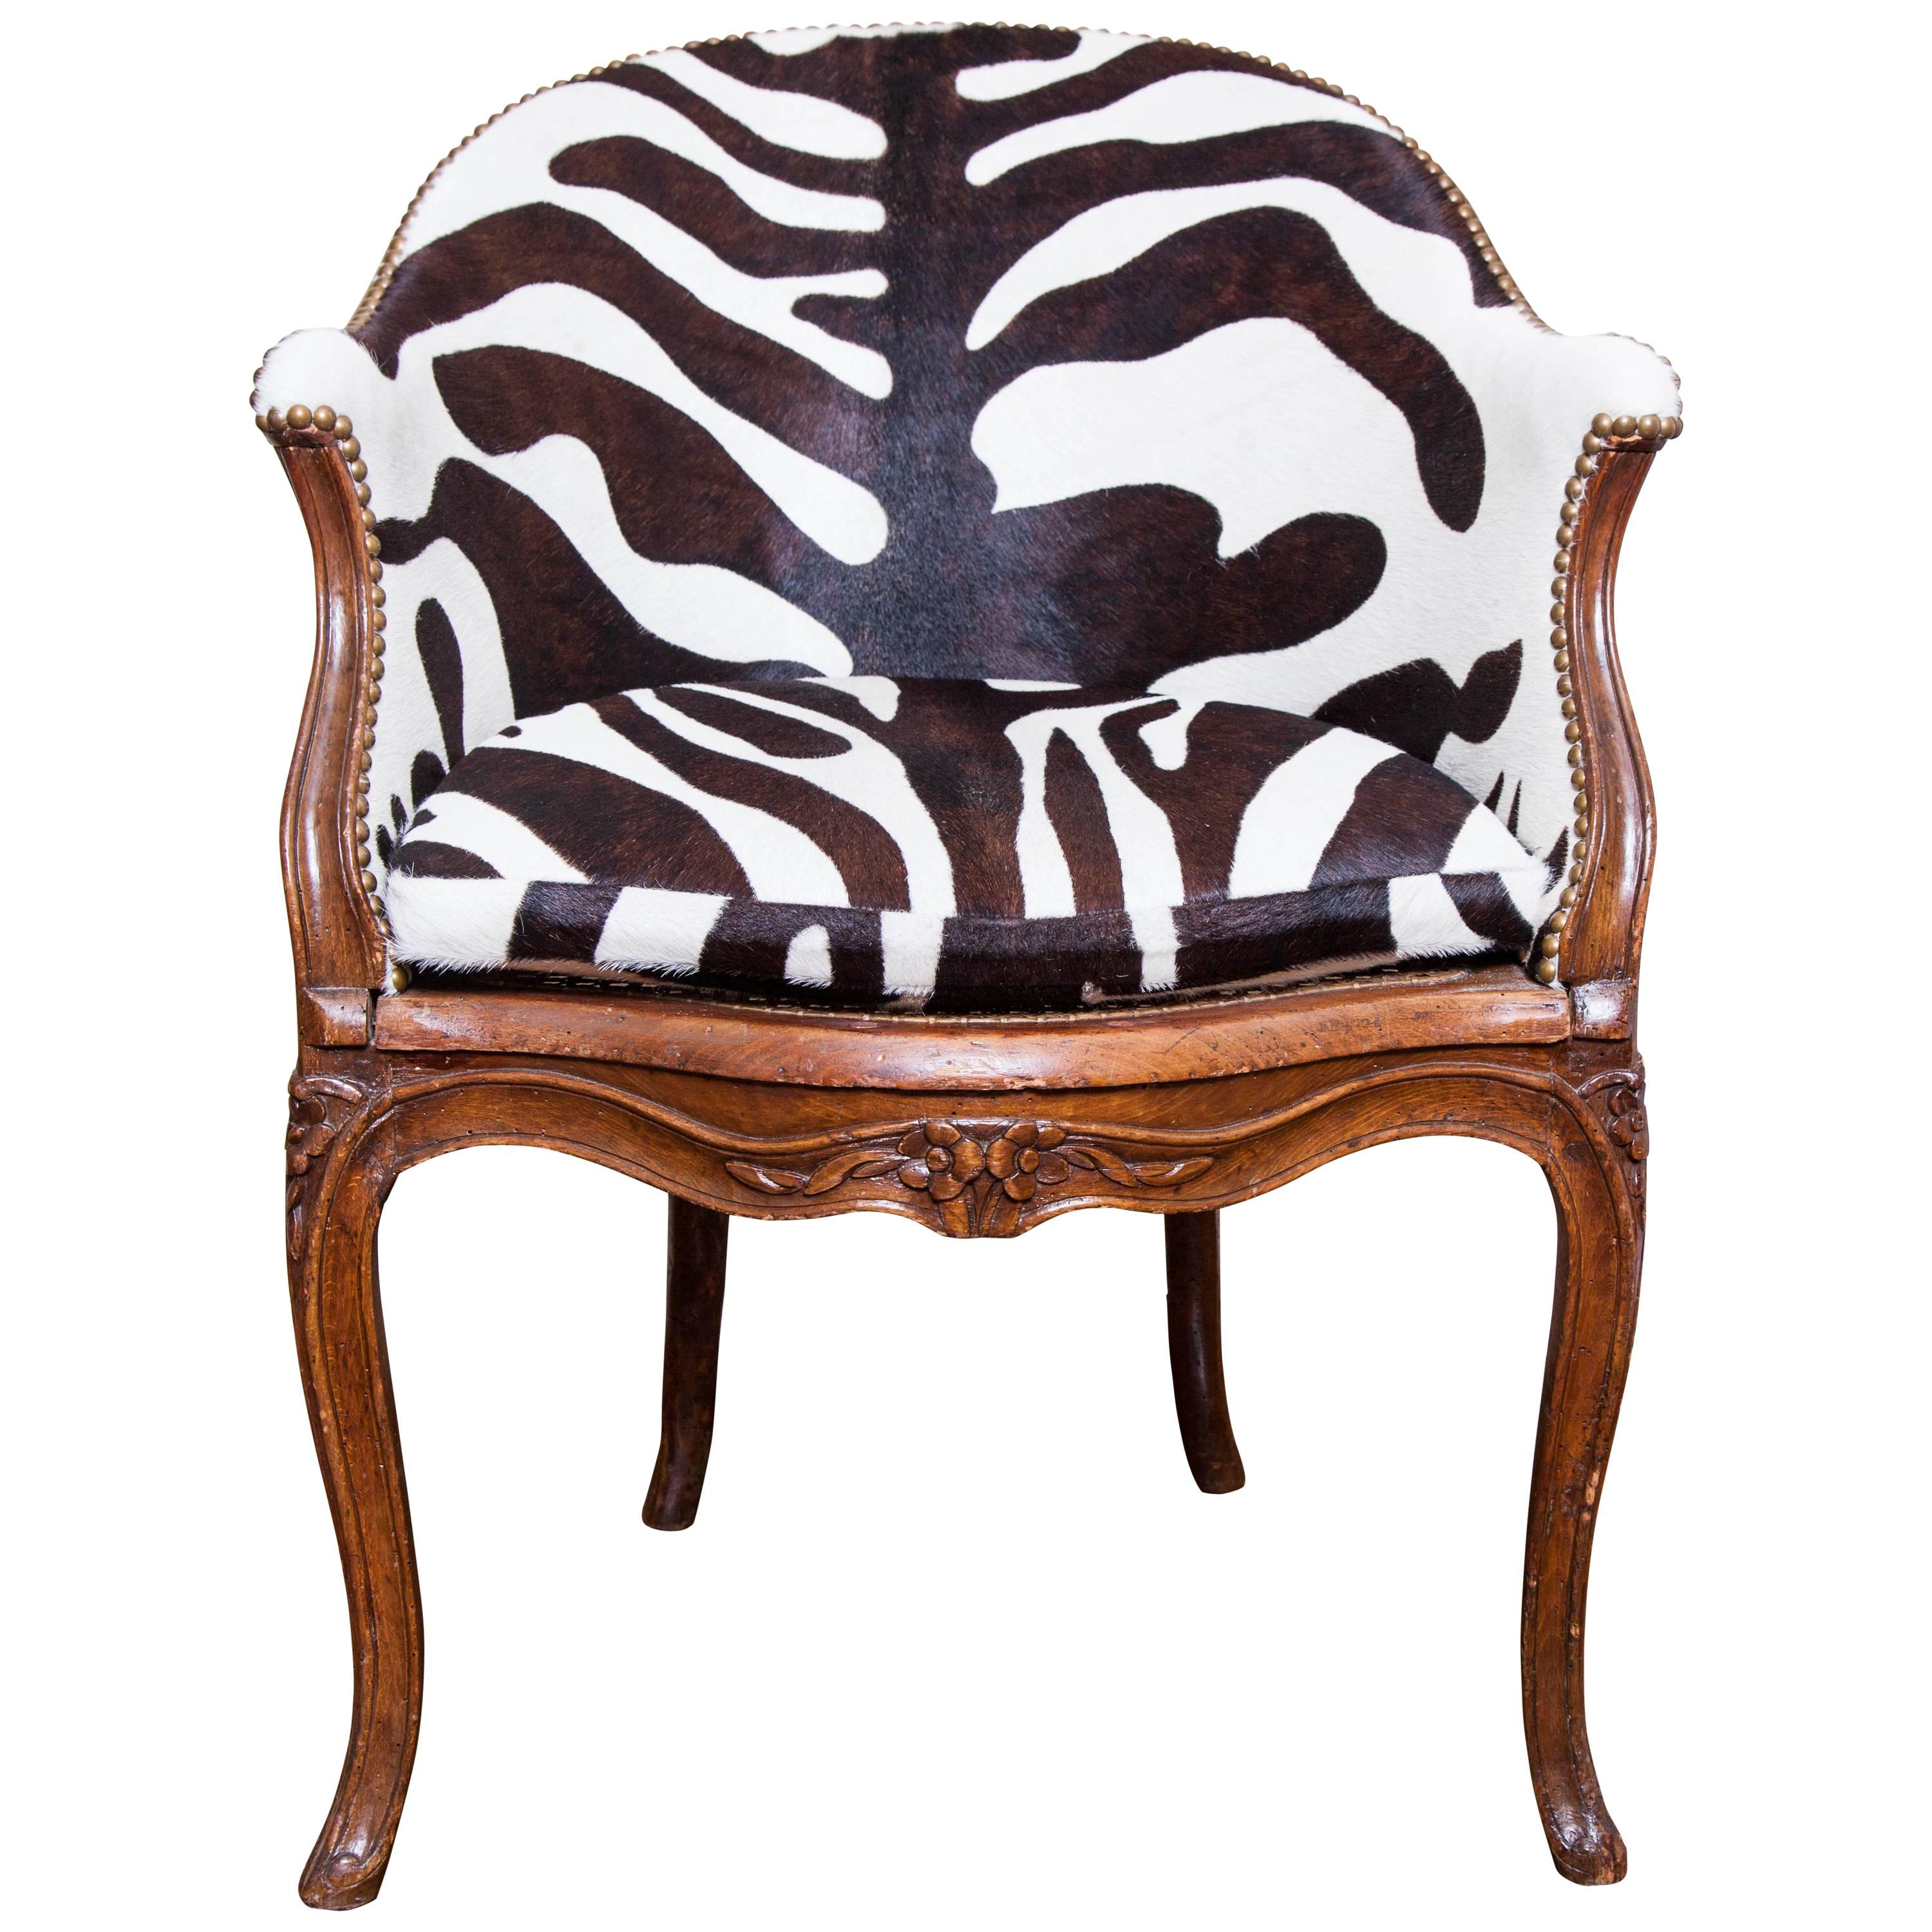 The floral carved walnut desk chair with caned back and seat, upholstered with zebra pattern dyed calfskin, with floral carving. small opening in the caning which is visible in the photo. 
